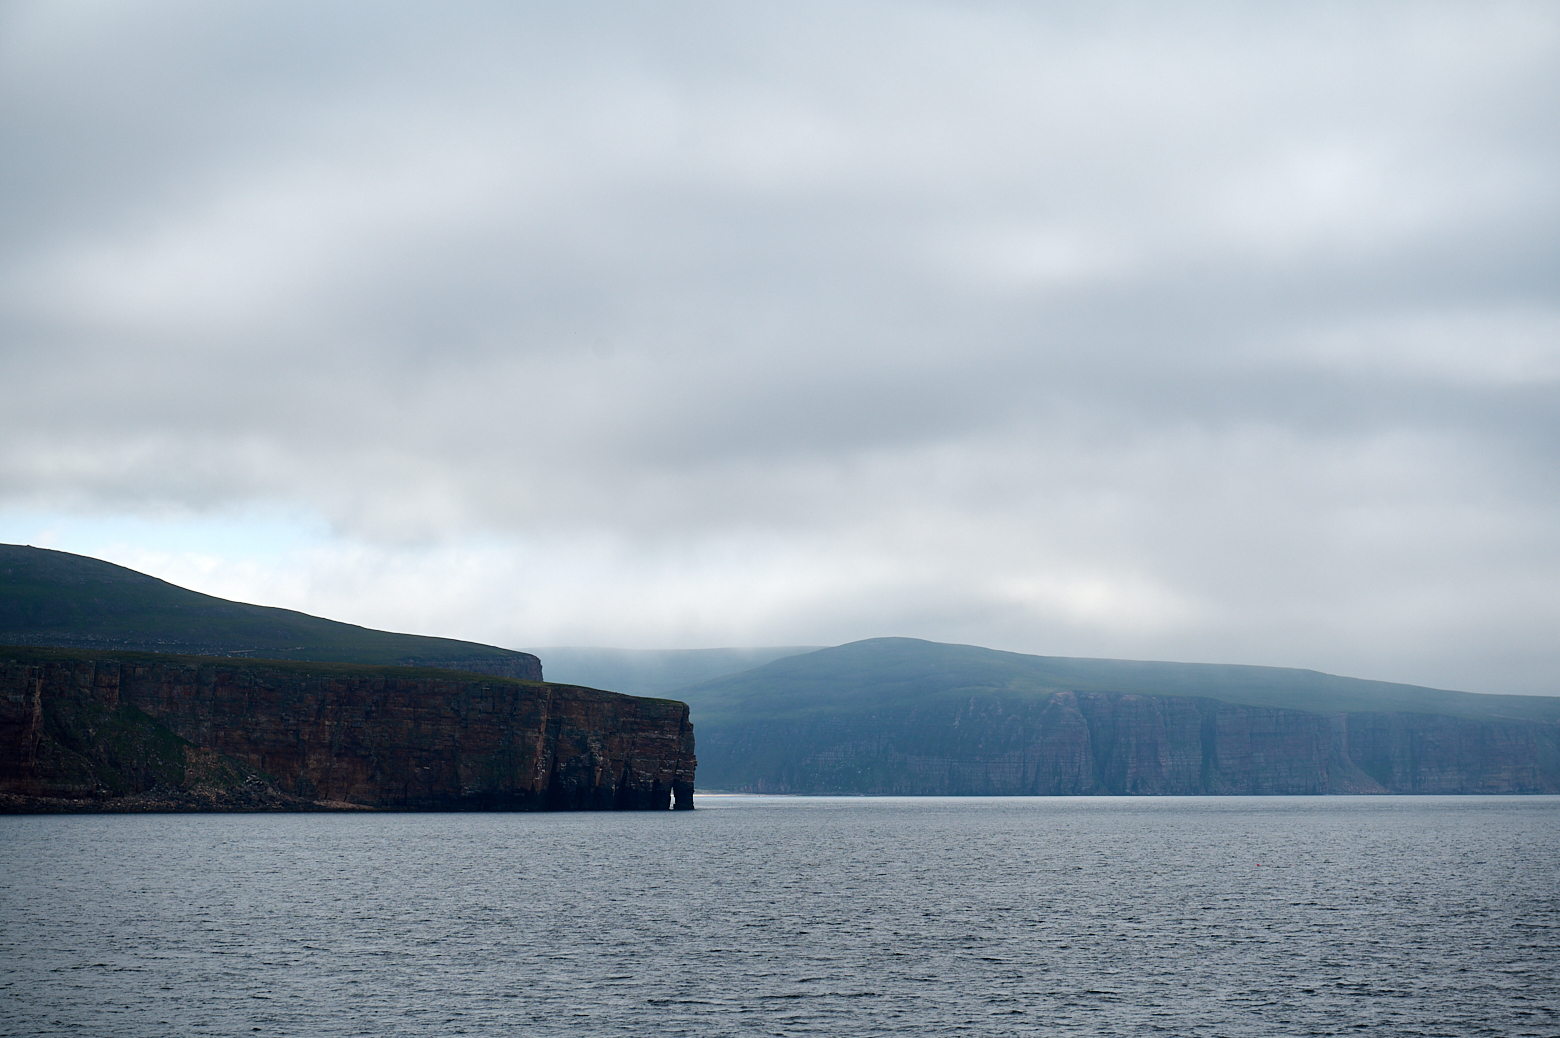 Leaving Orkney and sailing next to the Old Man of Hoy.